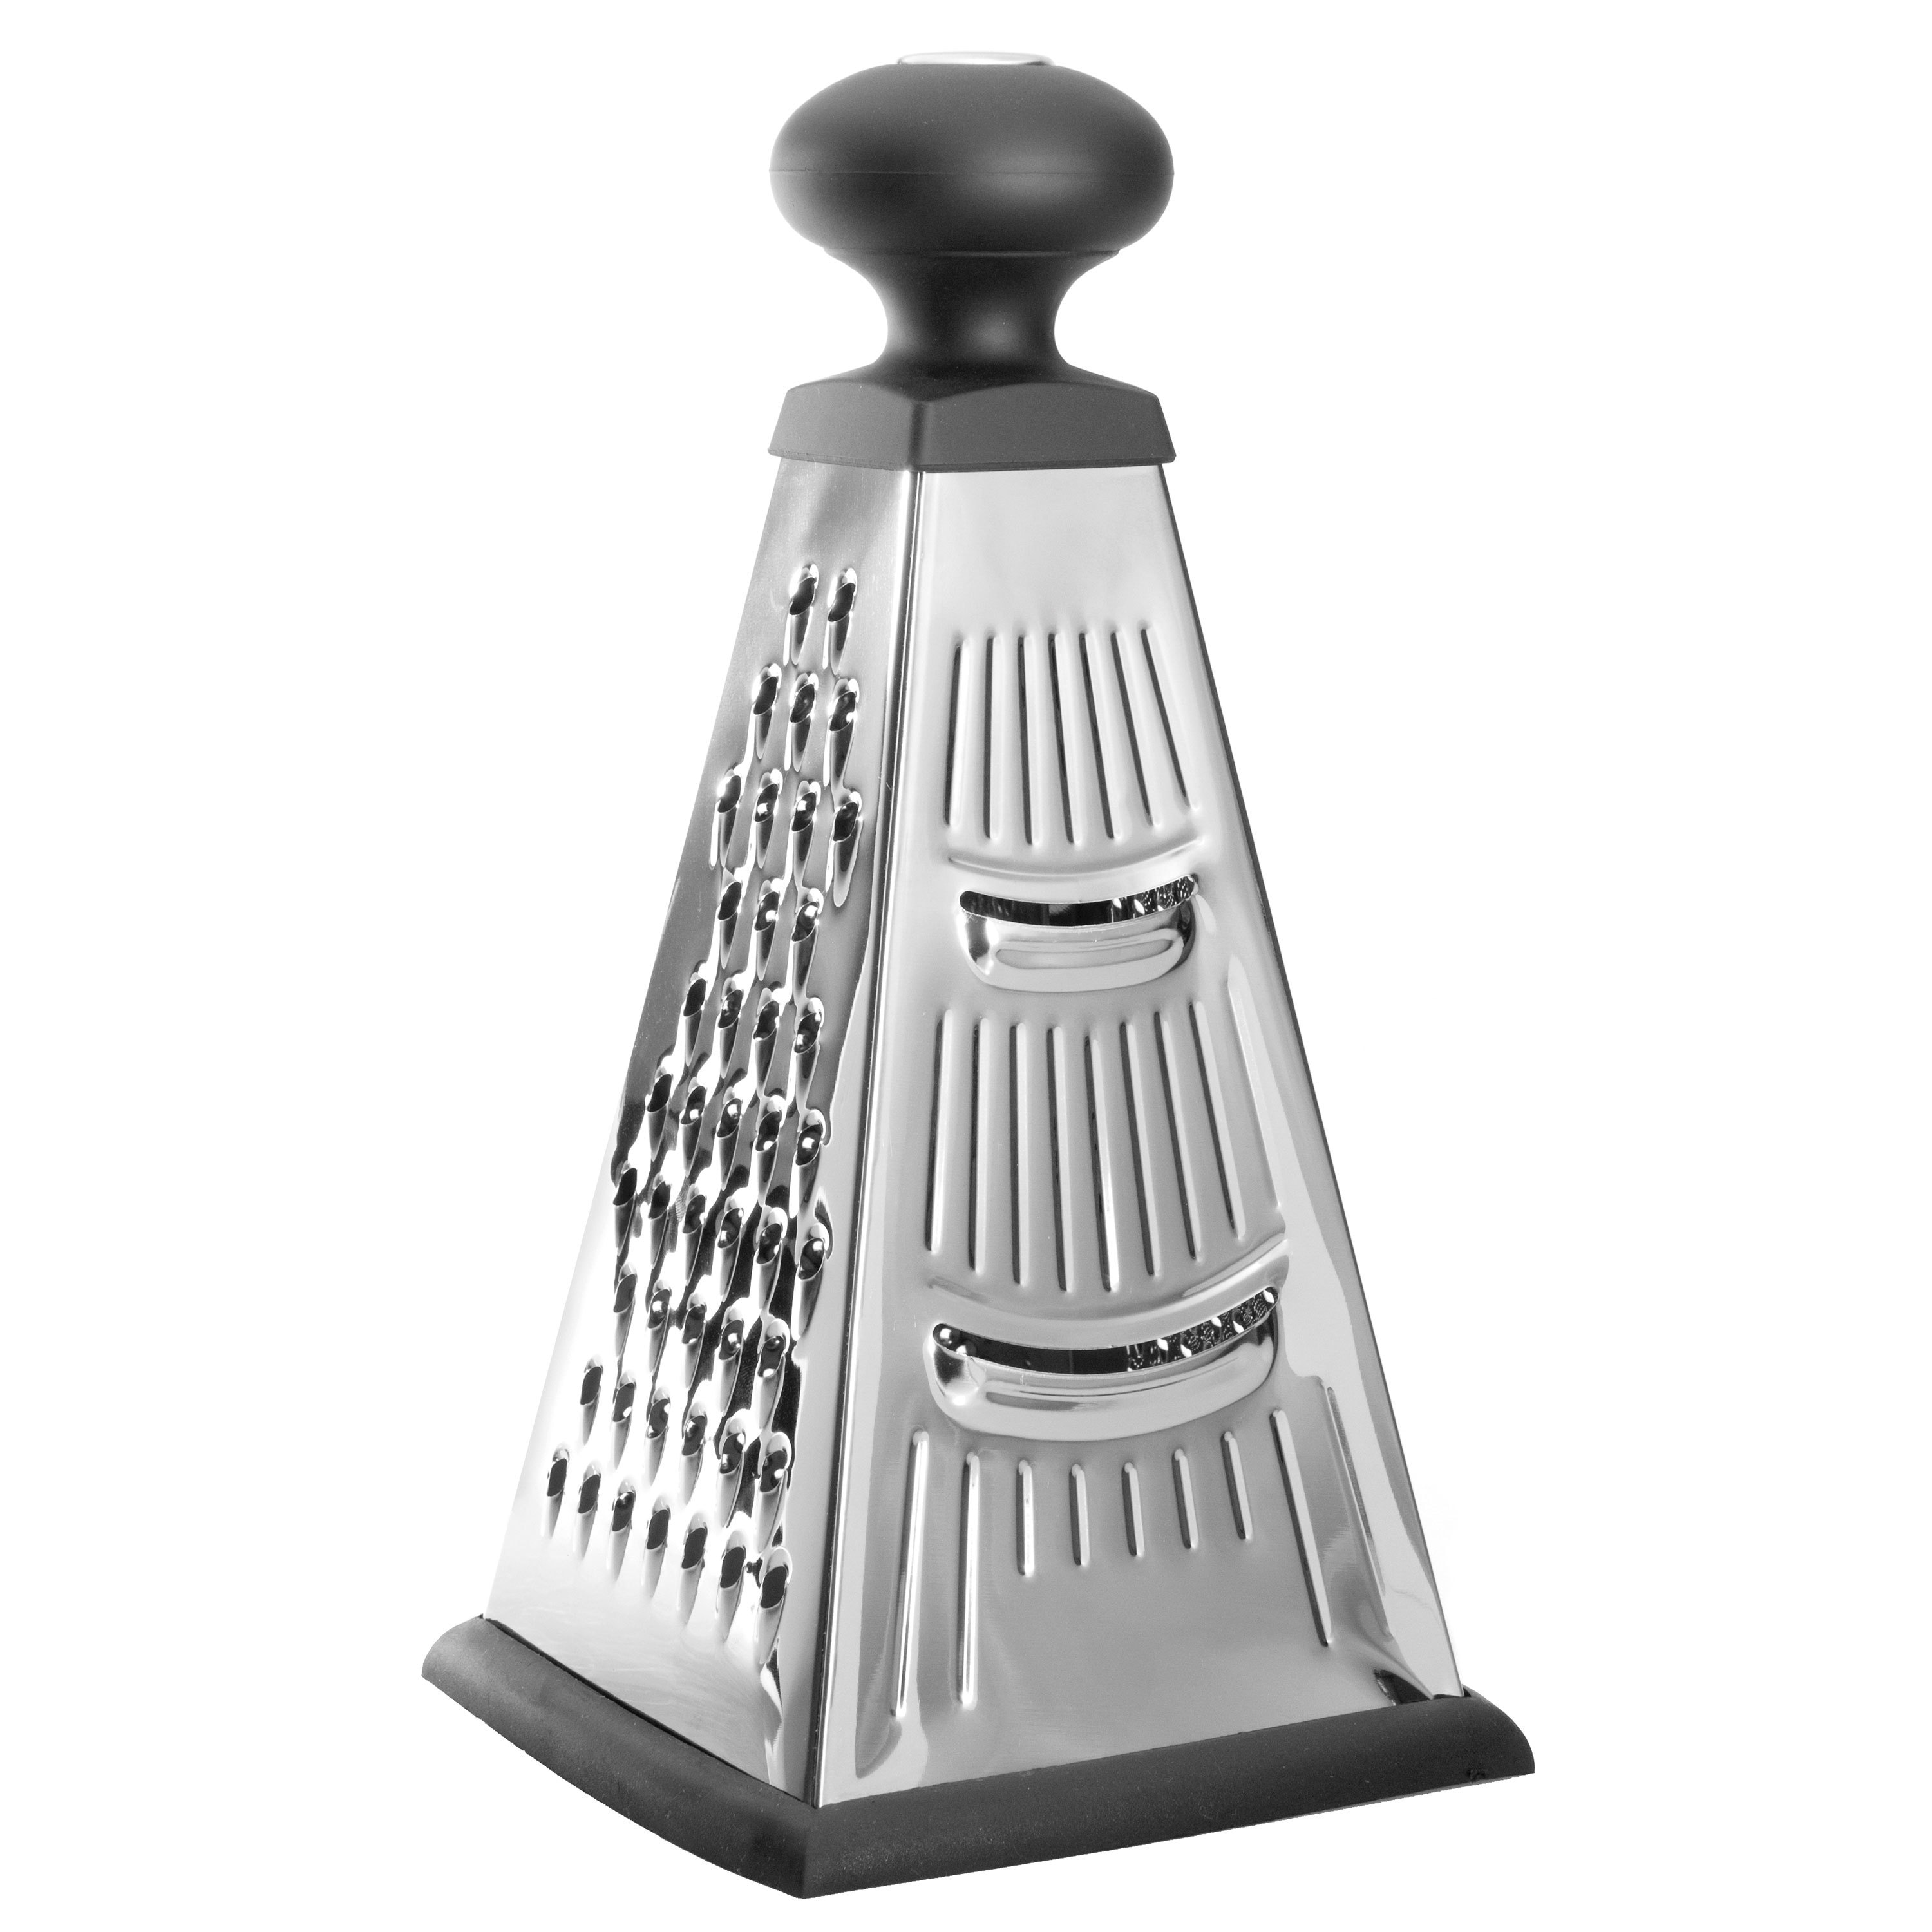 https://ak1.ostkcdn.com/images/products/22277704/Essentials-10-4-Sided-Pyramid-Grater-03e9a9d3-002e-4710-8b3c-9731a5fb1d2f.jpg